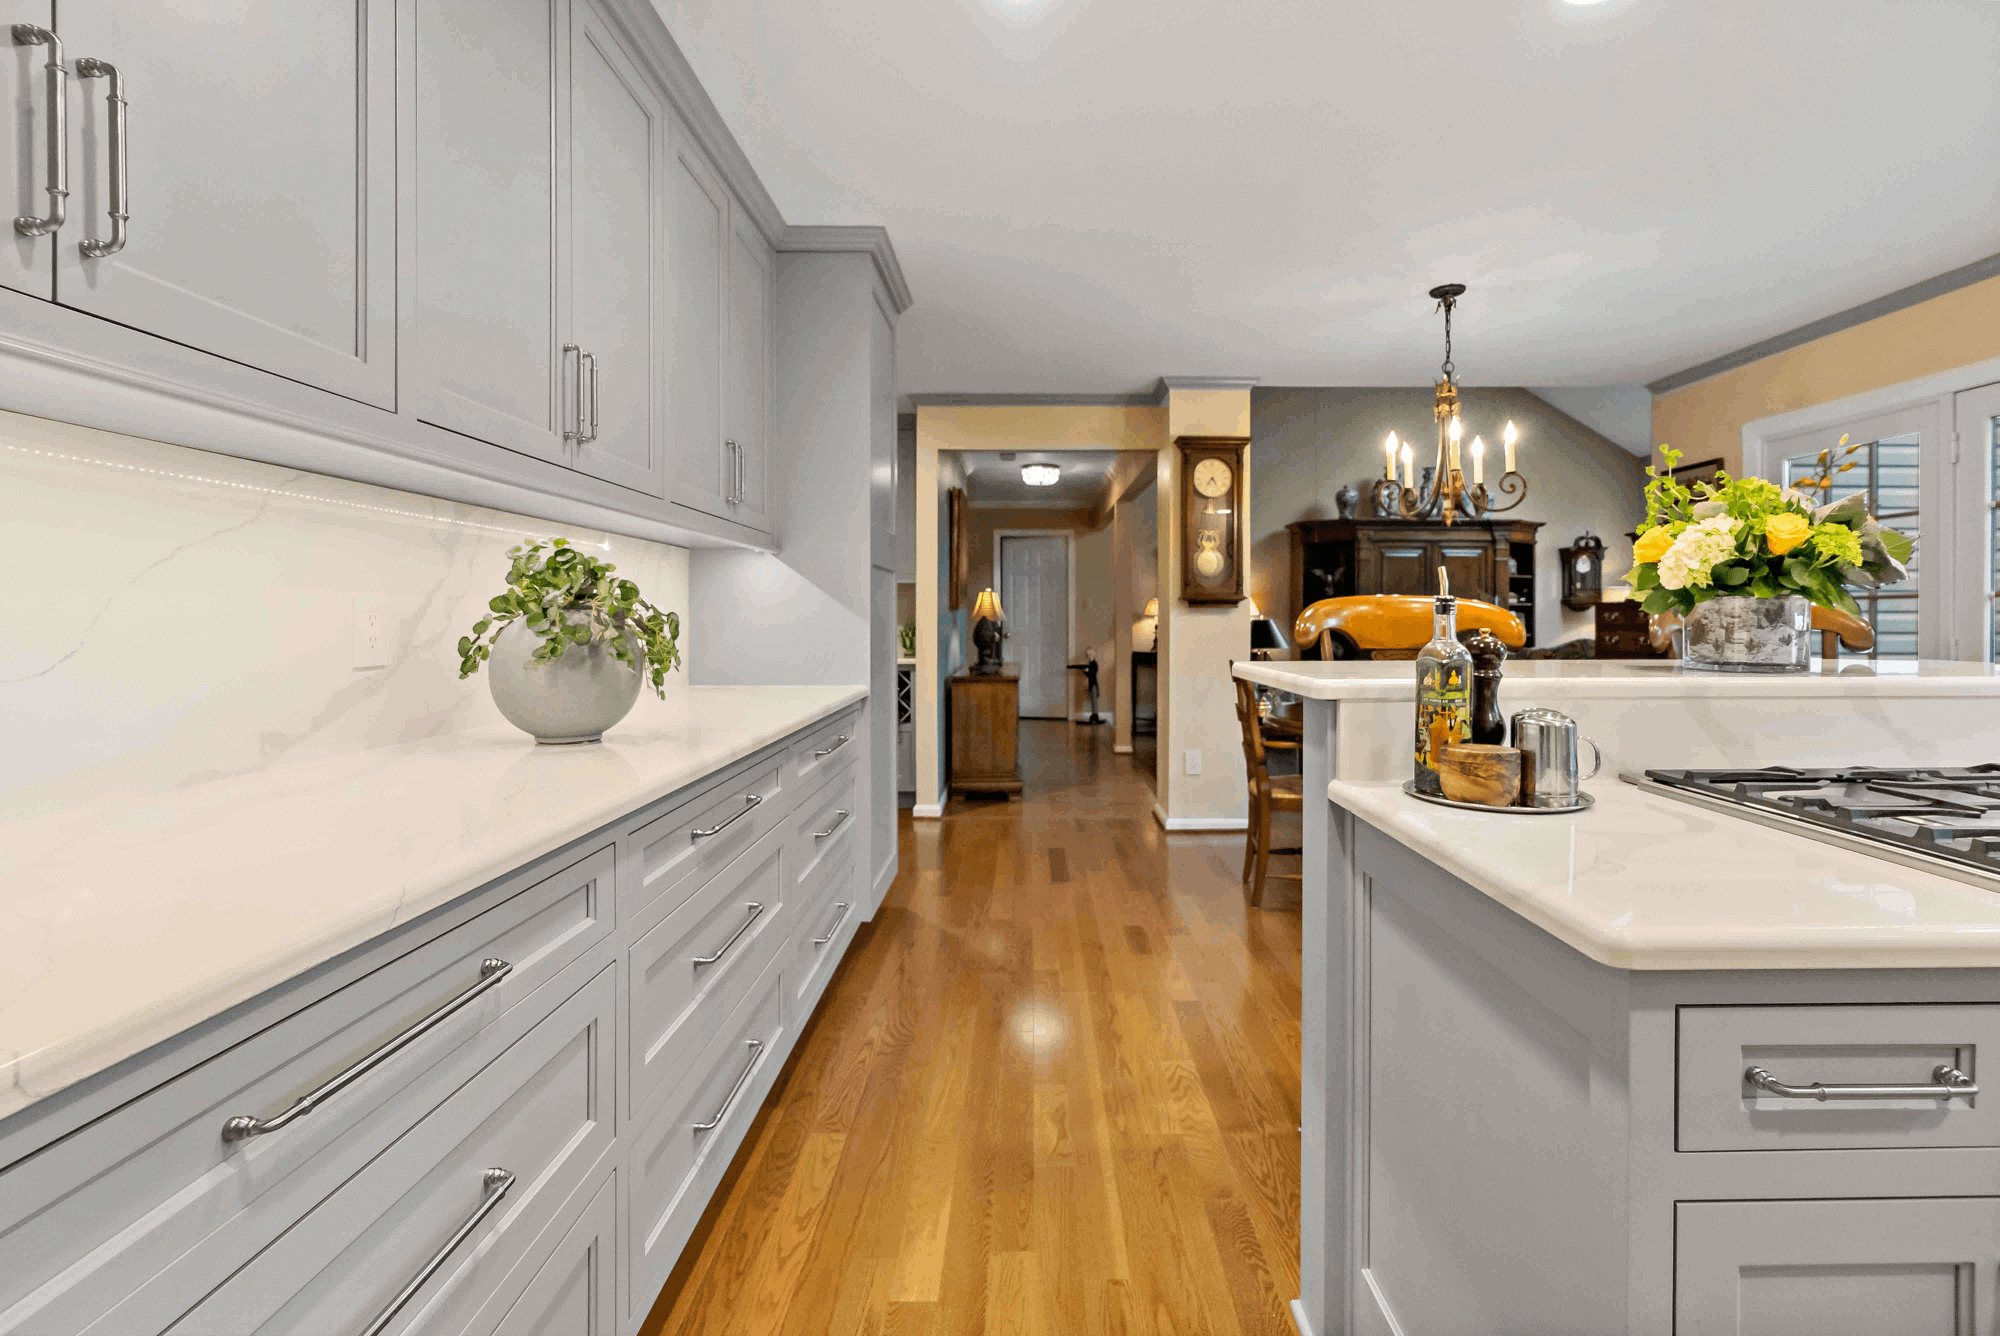 Marble white backsplash and countertops in kitchen